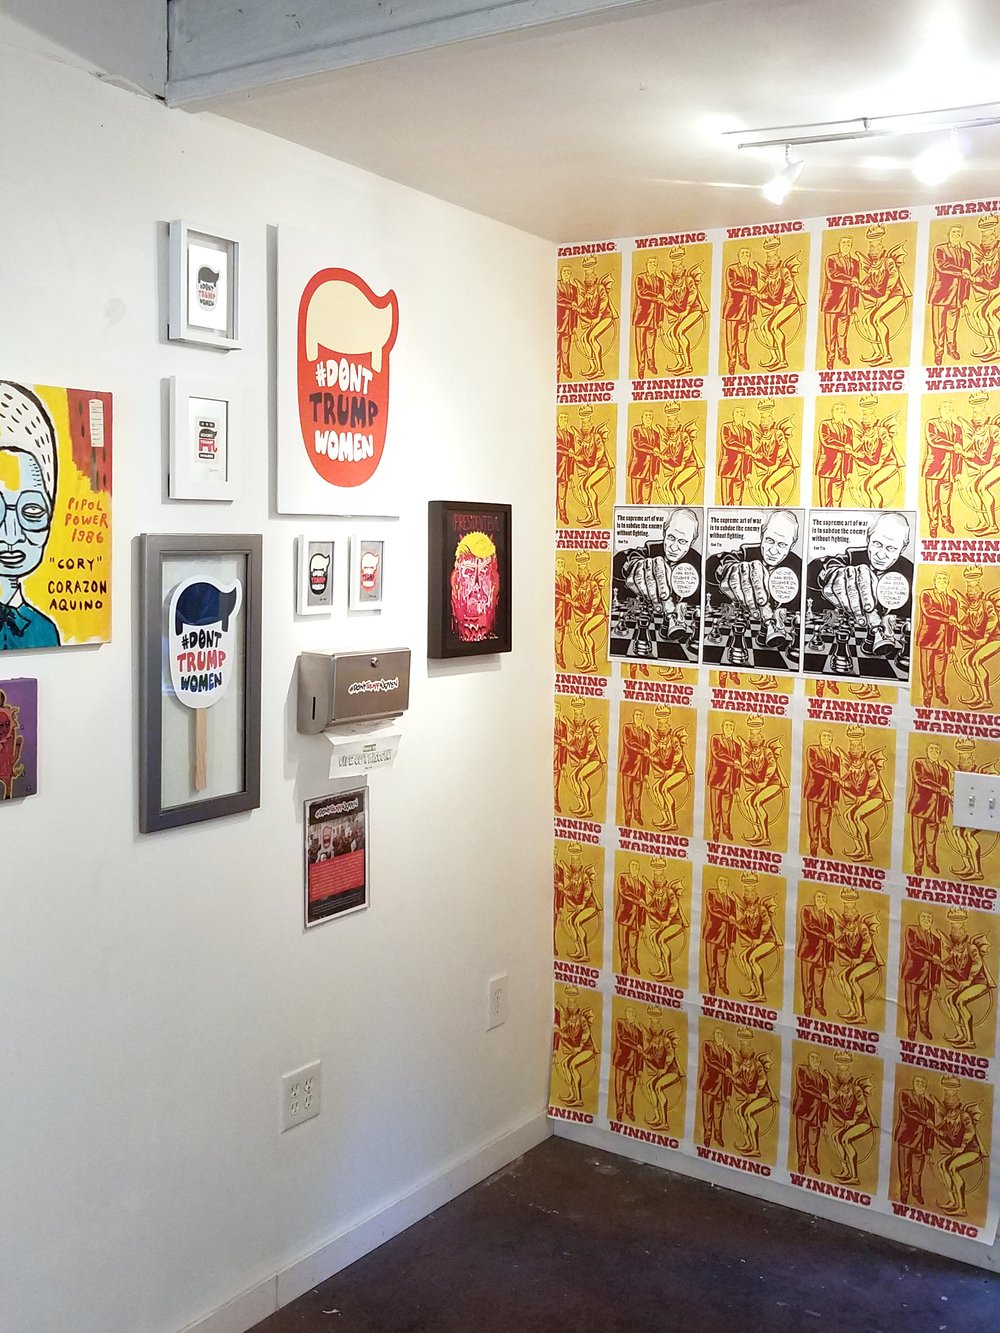  The #DontTrumpWomen campaign continues its journey with participation in  PEOPLE POWER , a political art show and collaboration between Lazer Zine and Rock Paper Scissors Collective in Oakland, California. 